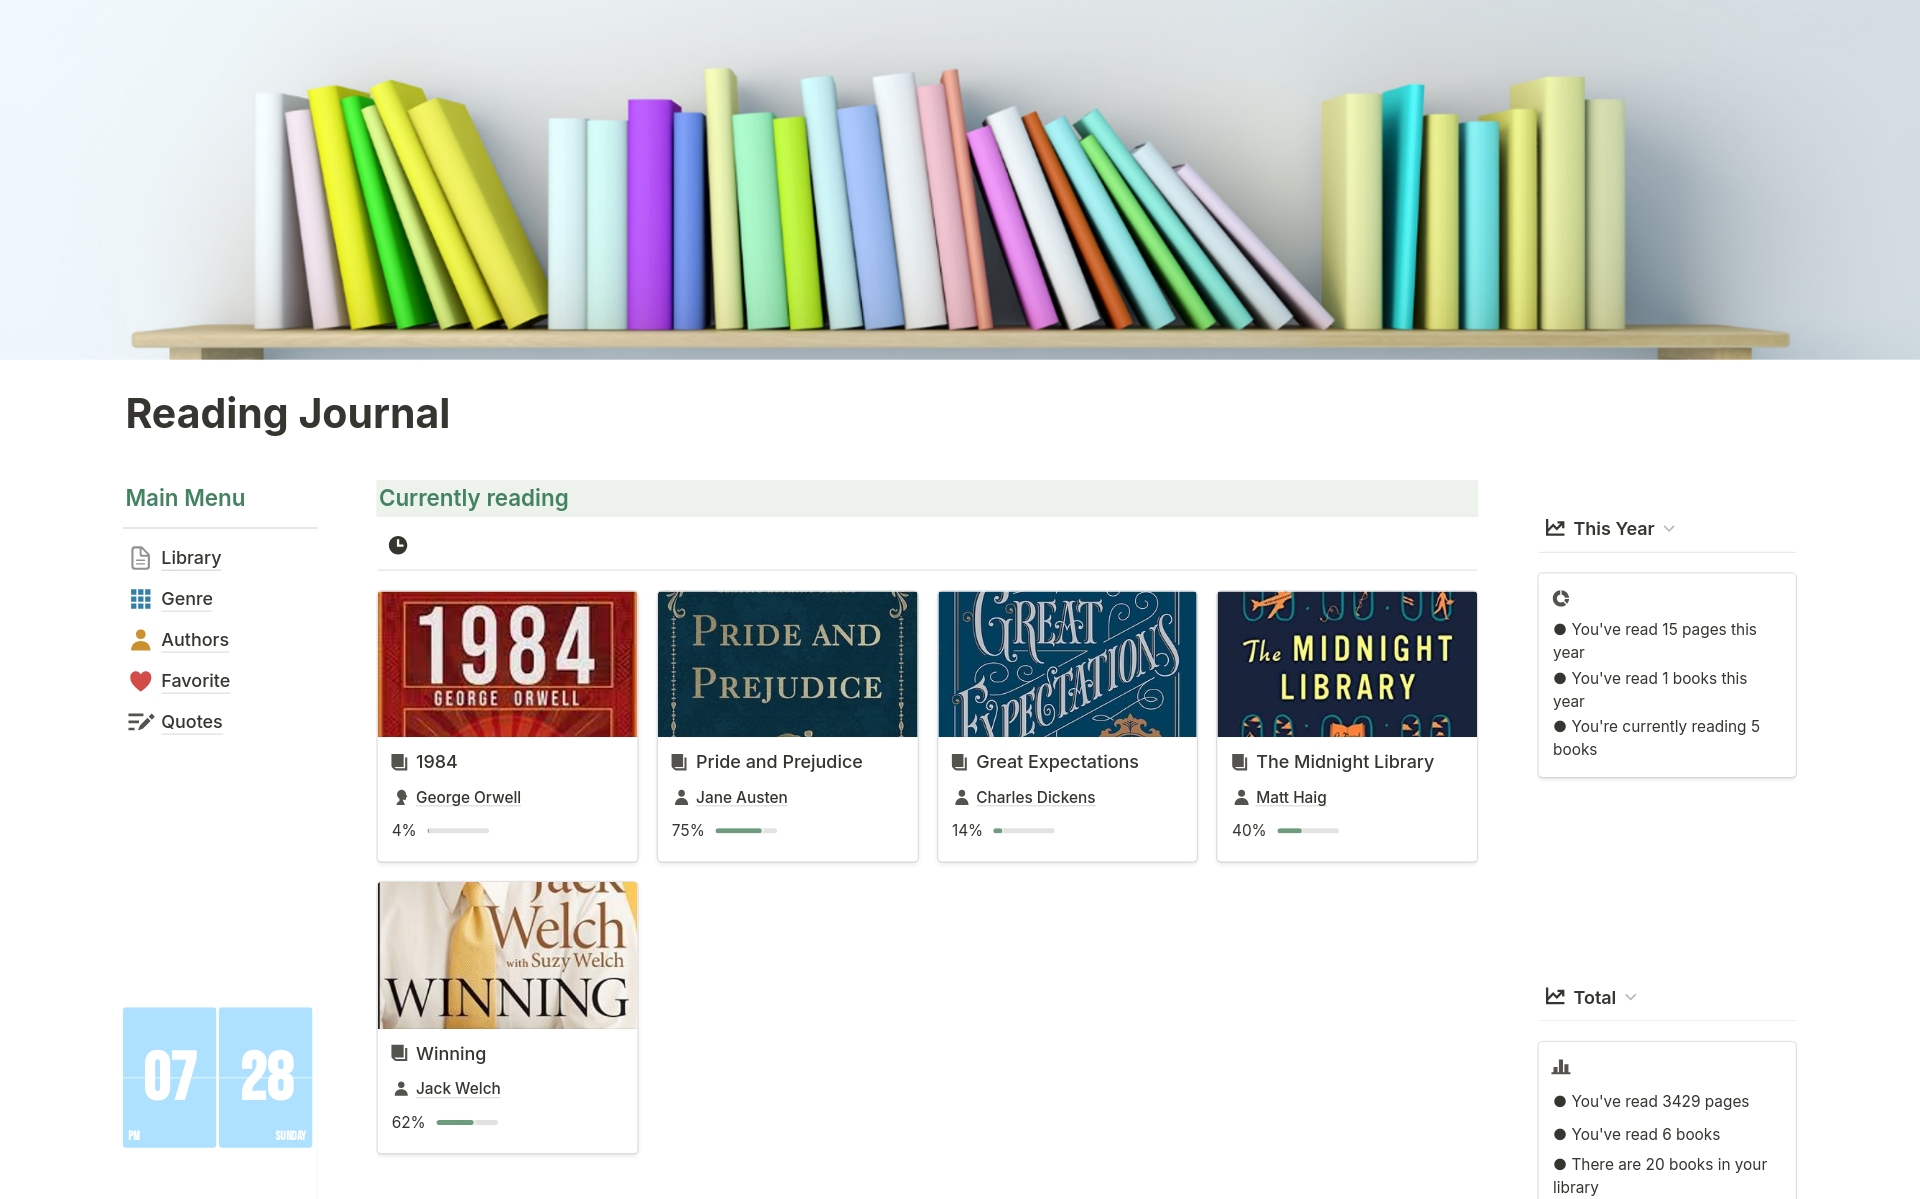 Reading Journal is your all-in-one solution to manage your books, track your reading progress, and create a deeper connection with the world of literature.